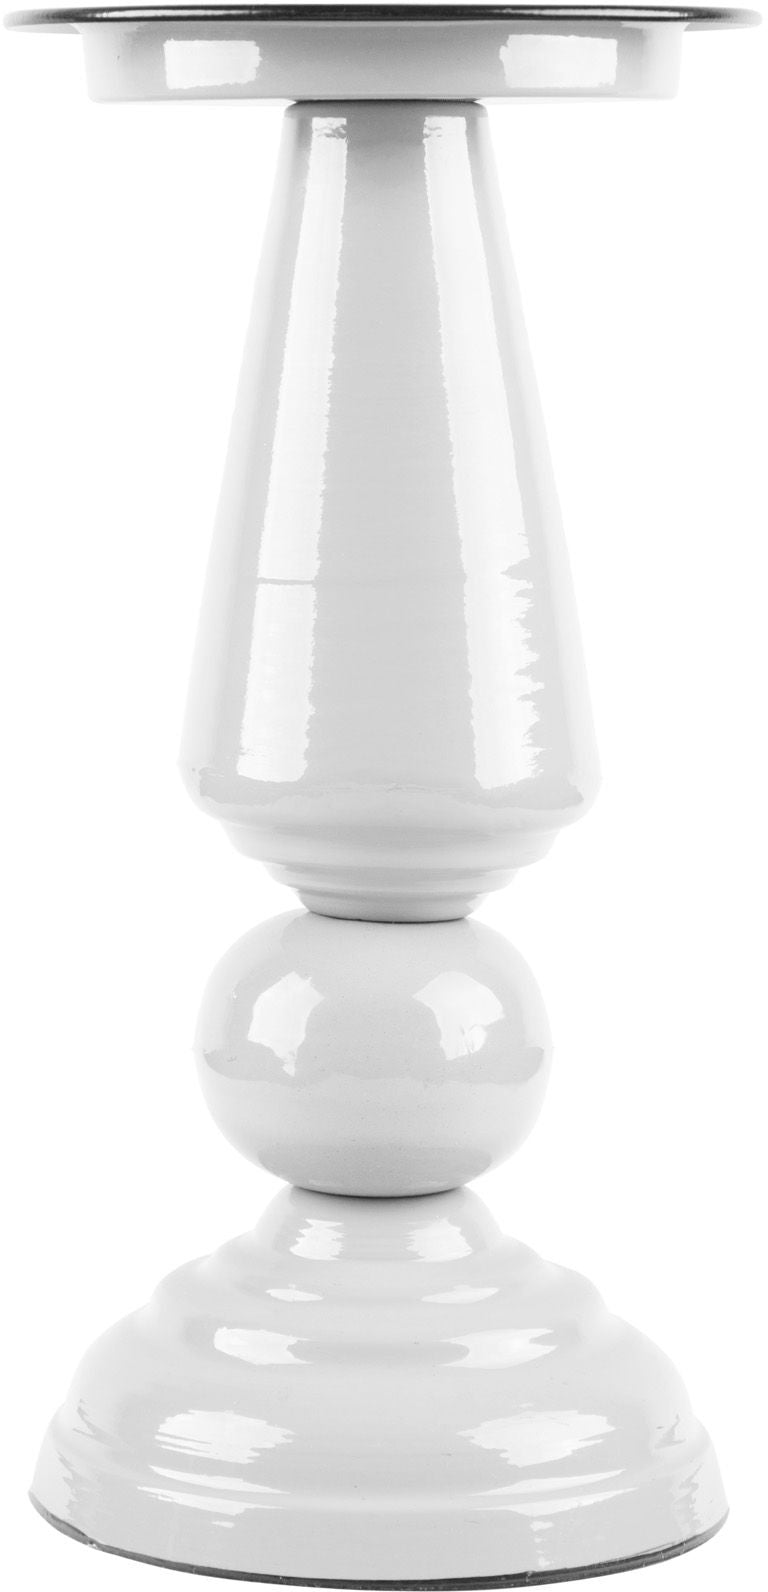 8"H SMALL WHITE CANDLE HOLDER